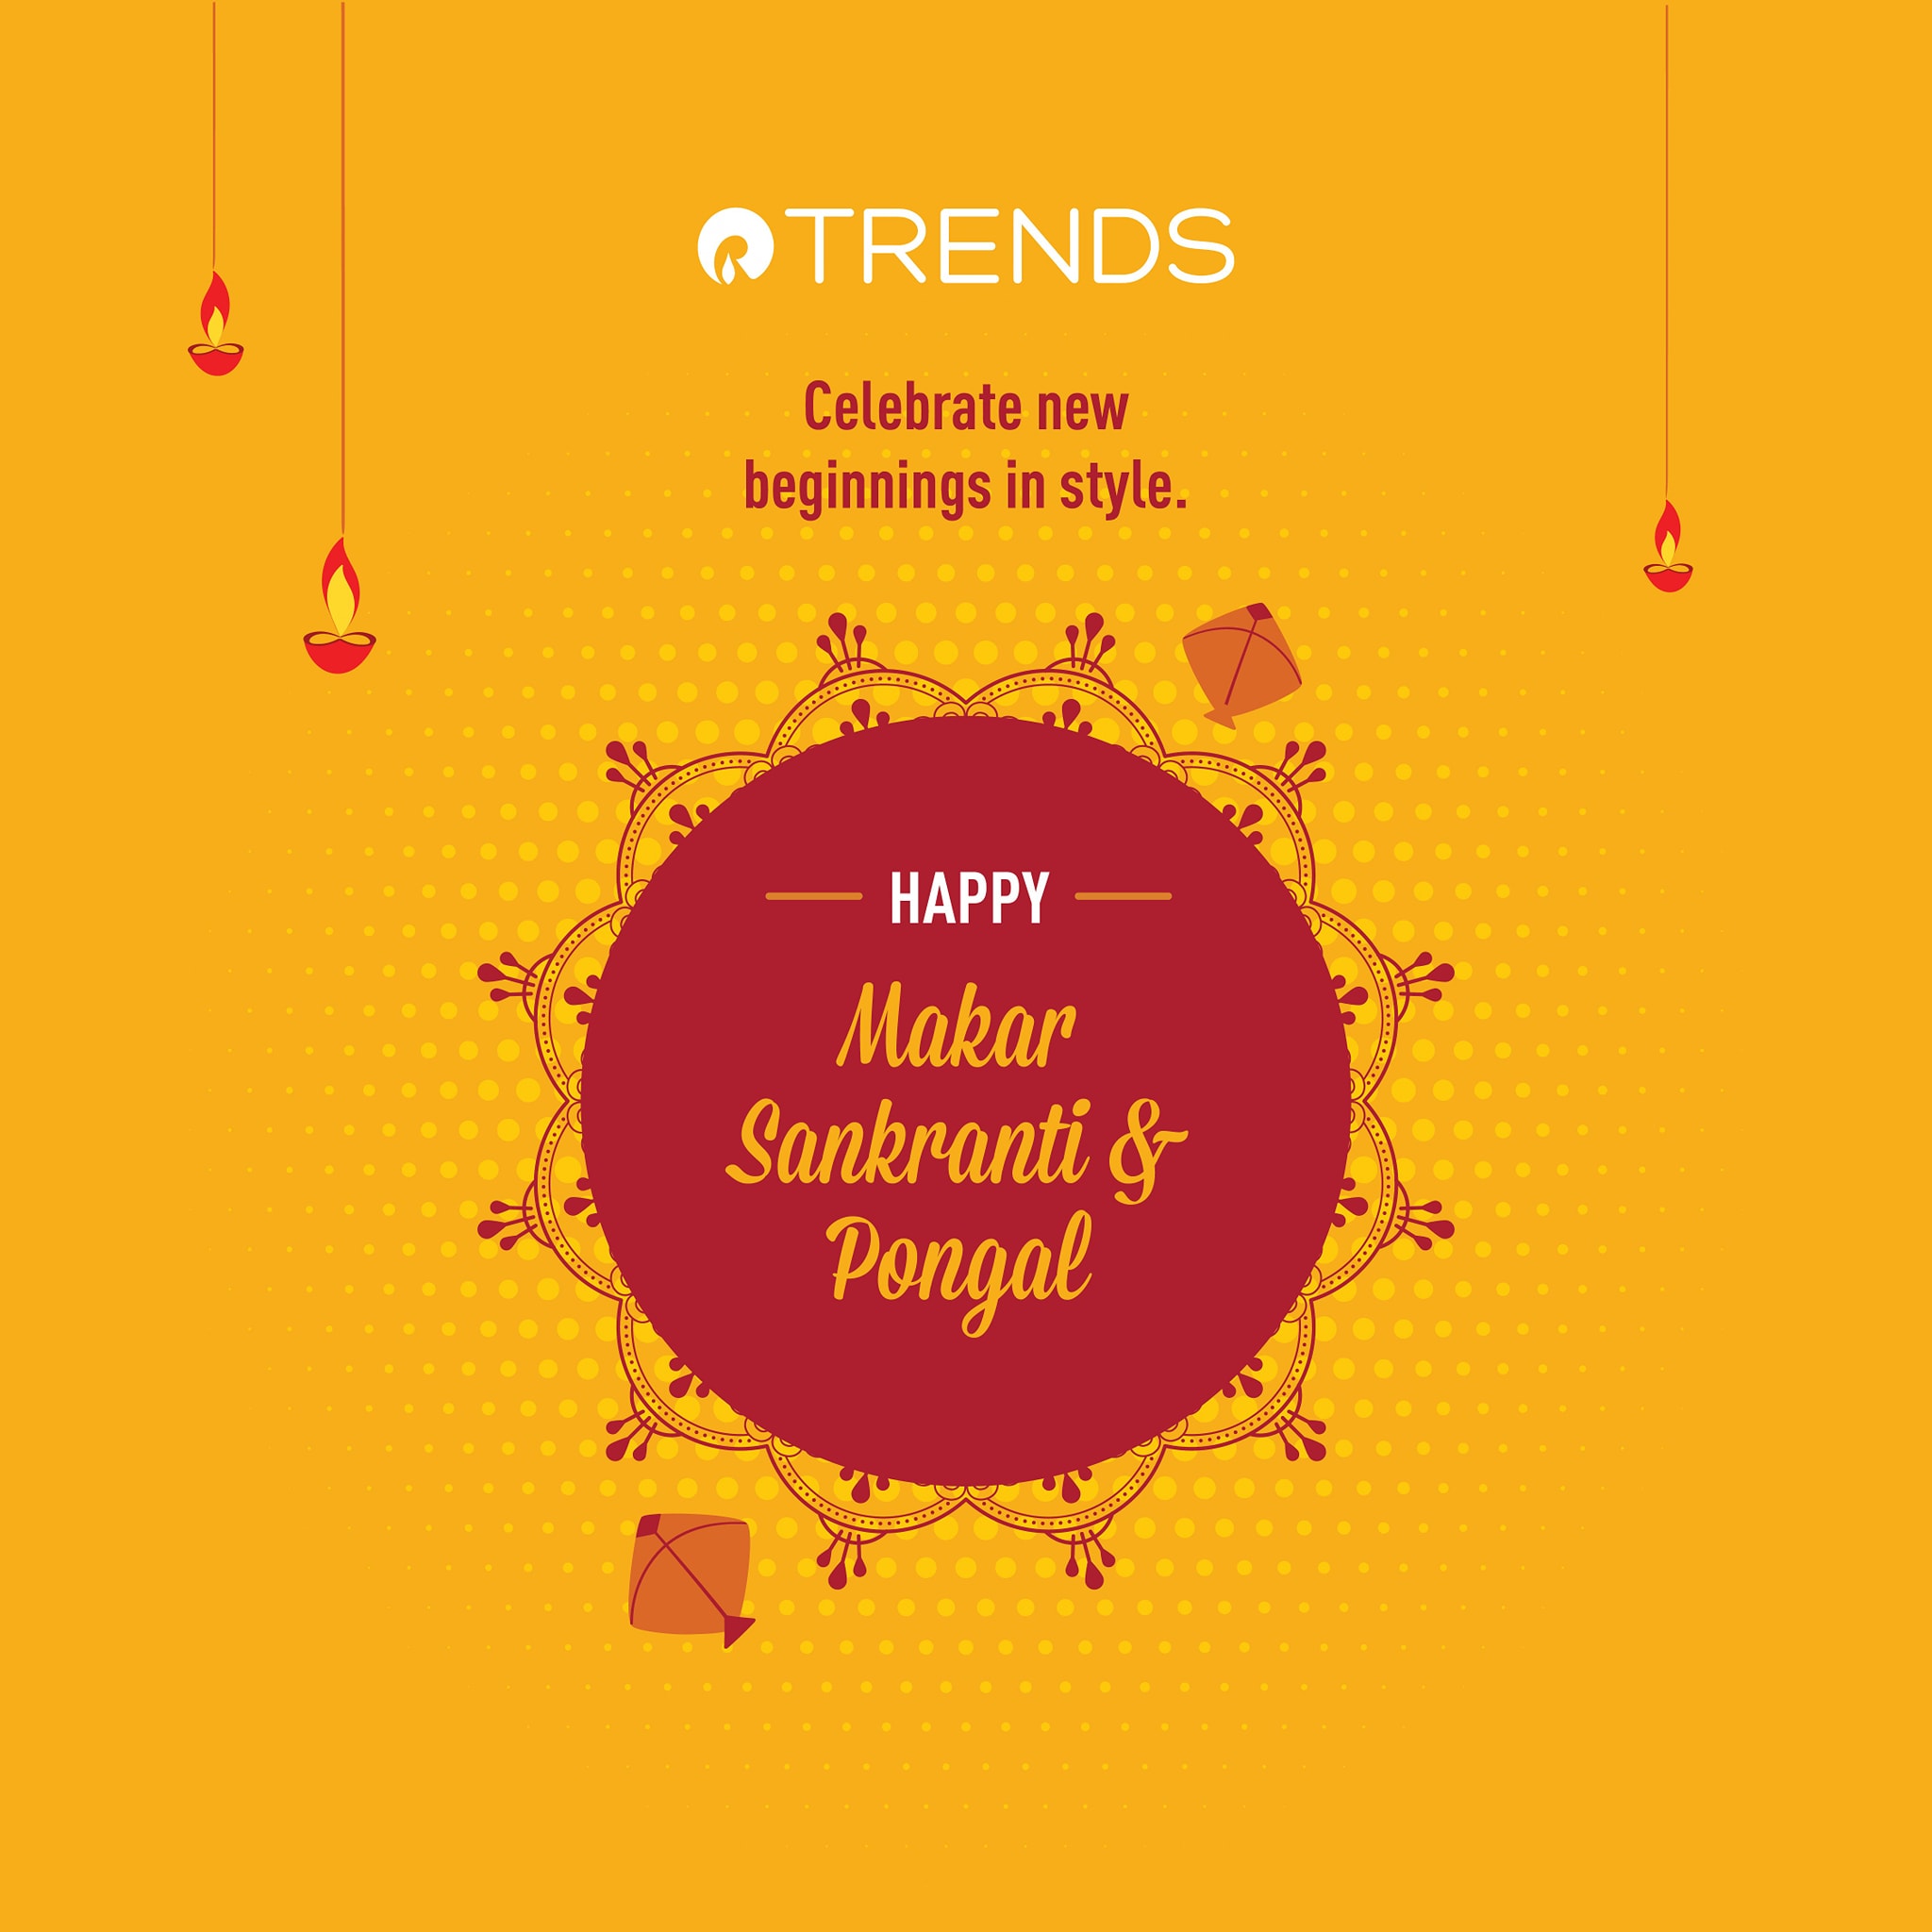 Happy Pongal Social Media Ideas - Reliance Trends